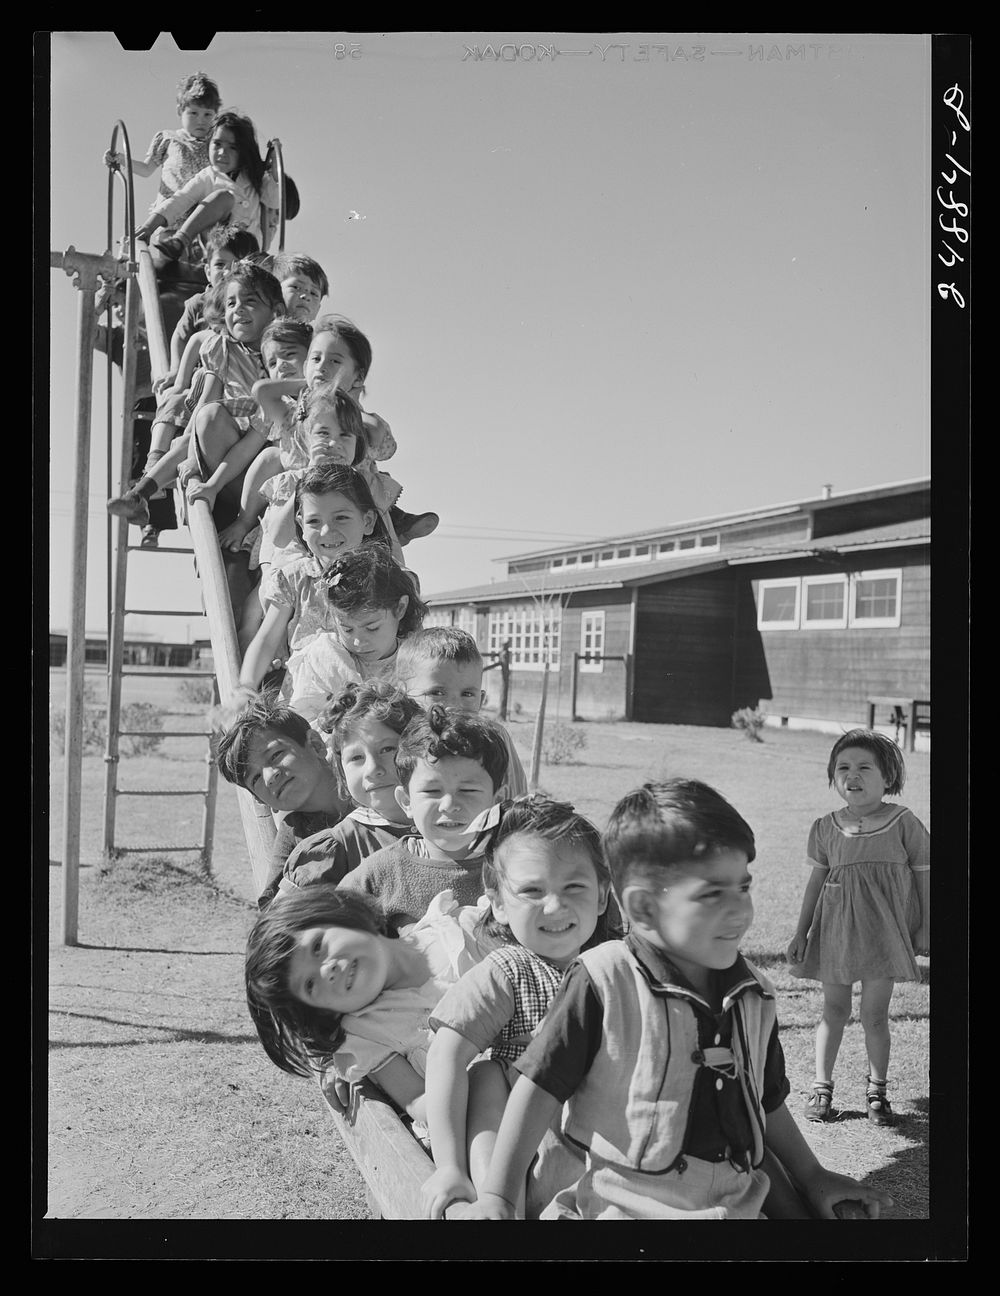 Nursery school playground. Robstown camp, Texas. Sourced from the Library of Congress.